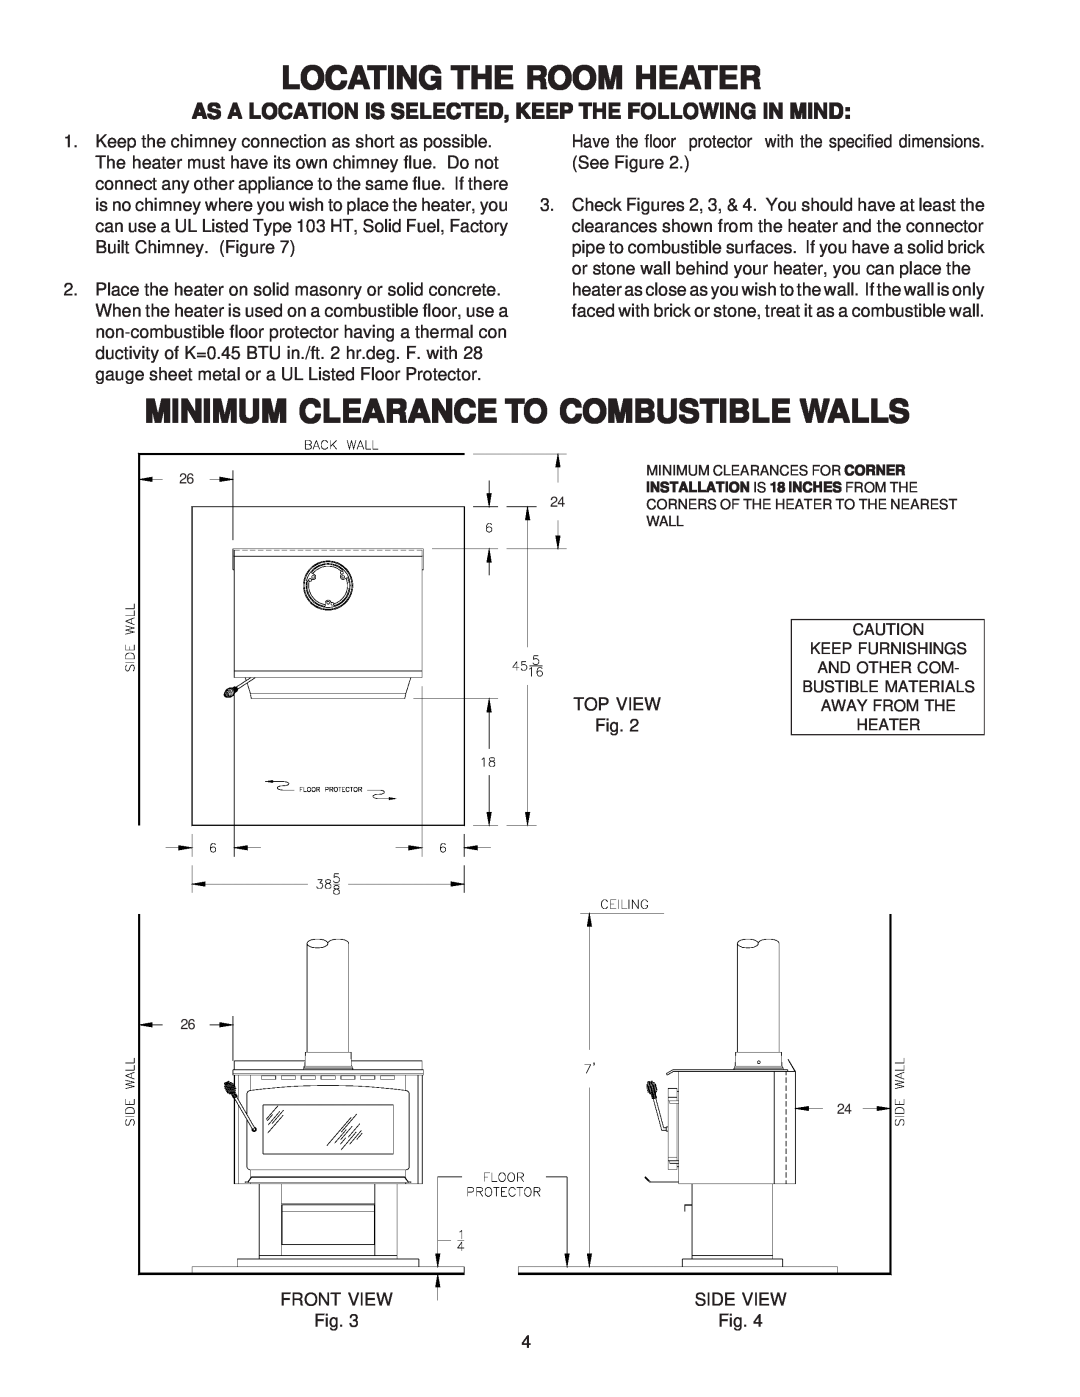 United States Stove 2007 owner manual Locating The Room Heater, Minimum Clearance To Combustible Walls 